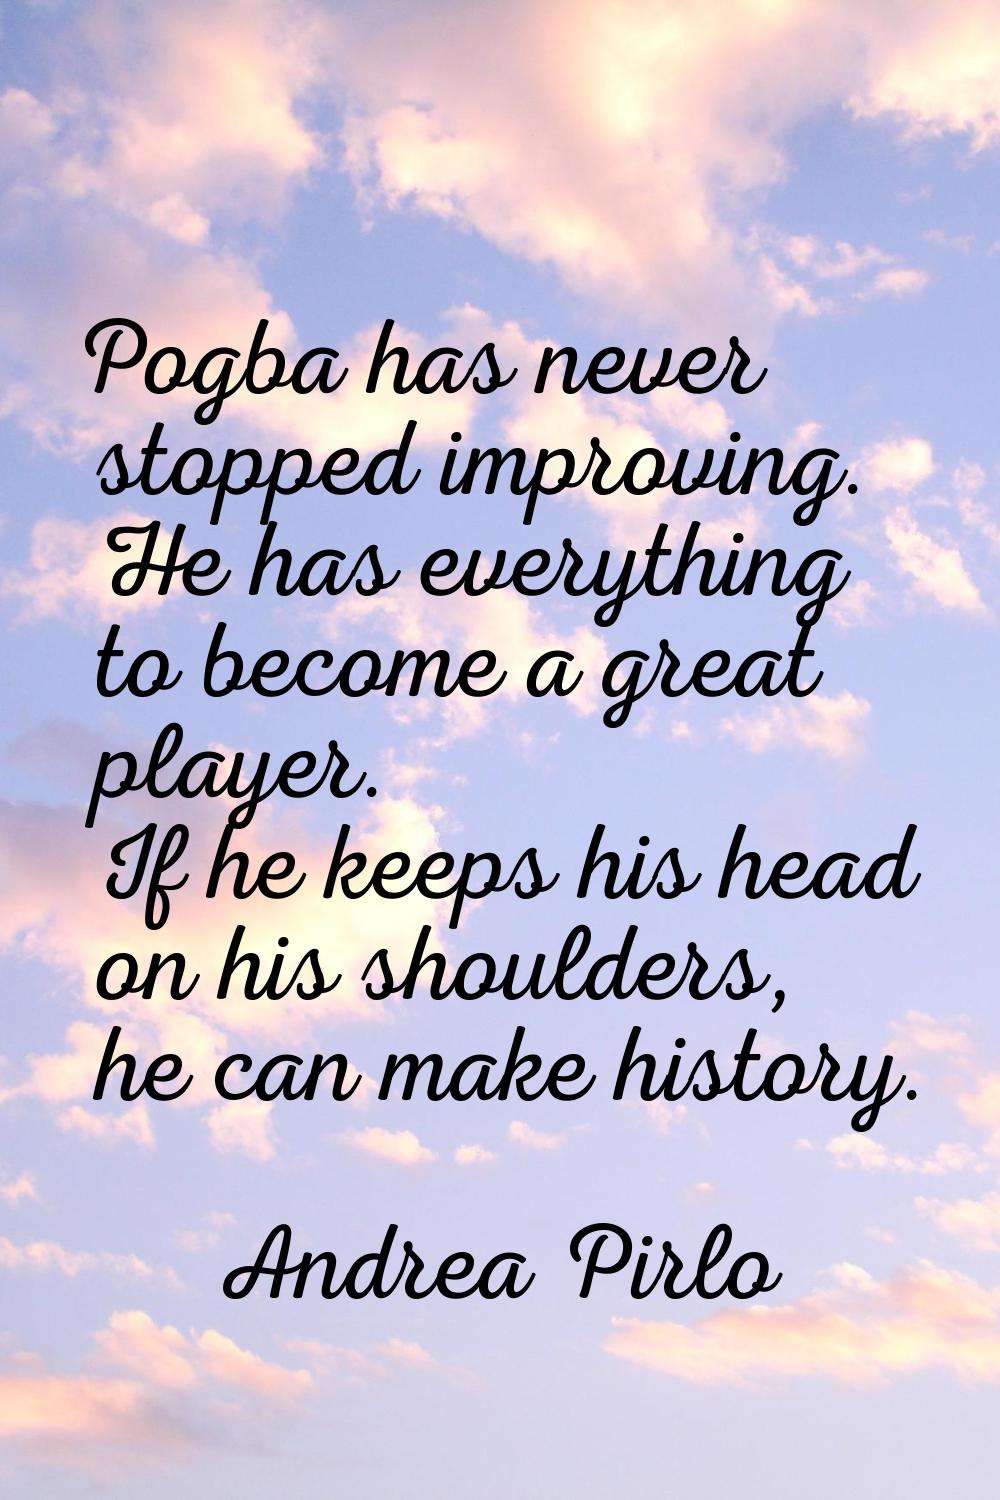 Pogba has never stopped improving. He has everything to become a great player. If he keeps his head